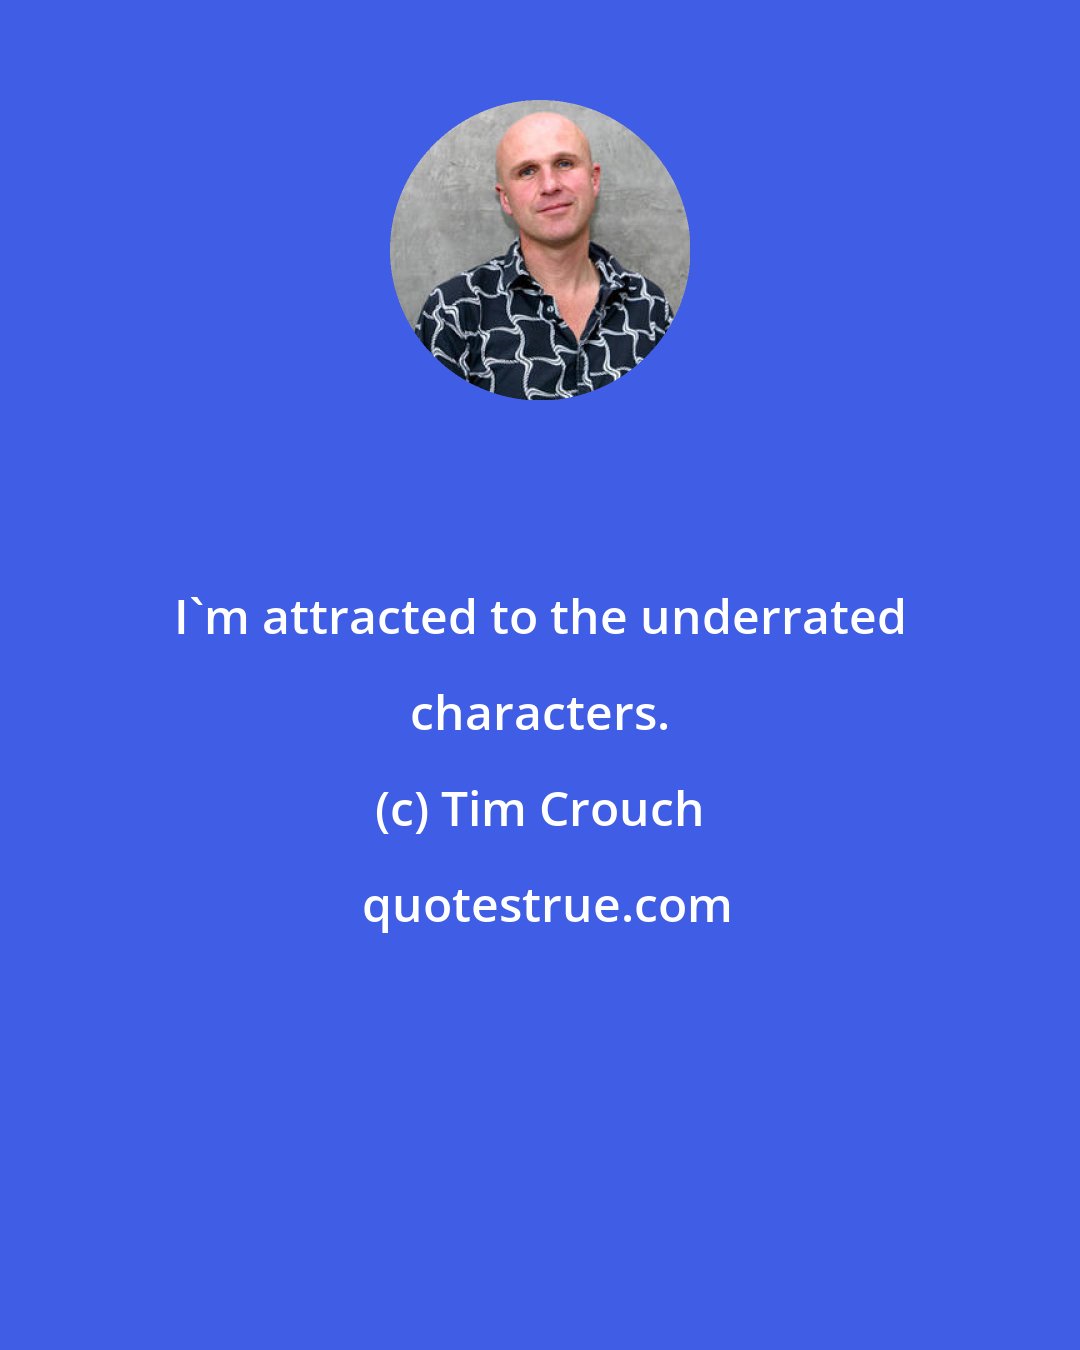 Tim Crouch: I'm attracted to the underrated characters.